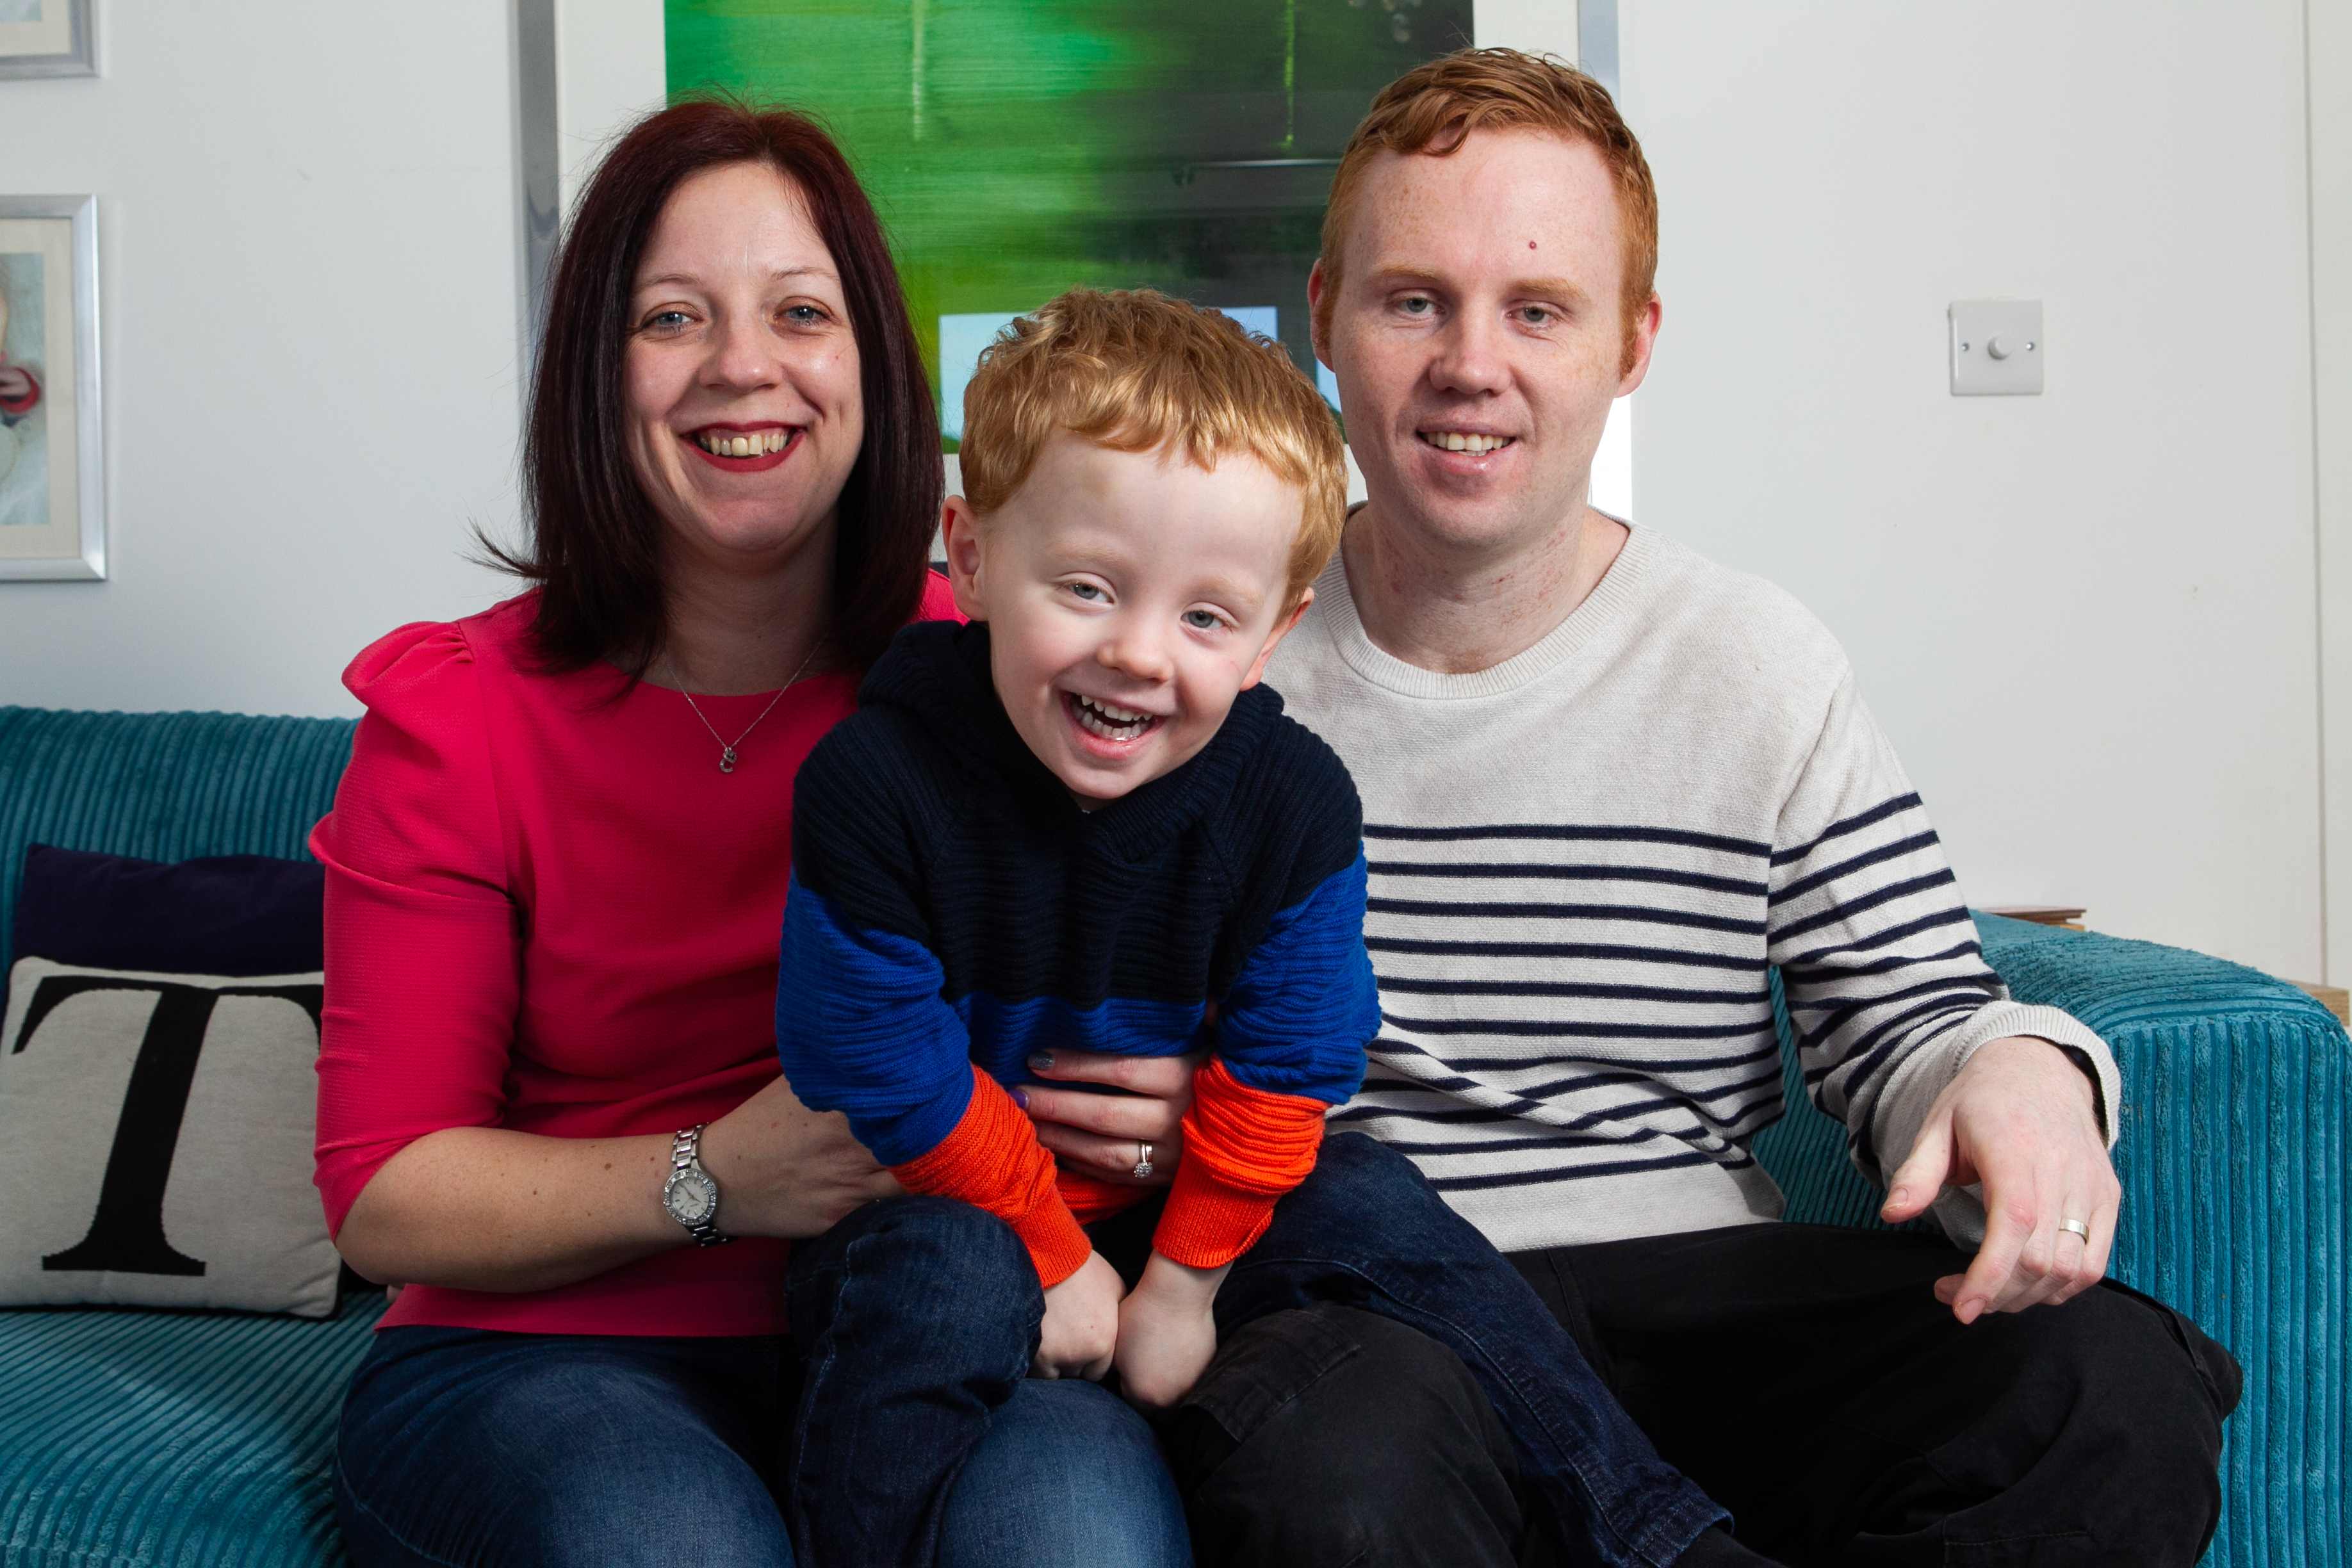 Martin Taylor with his wife Fiona and son, Cohen. Martin has Parkinsons Disease, but is upbeat about his condition, as he tells in a BBC Alba documentary about it. Location: Edinburgh